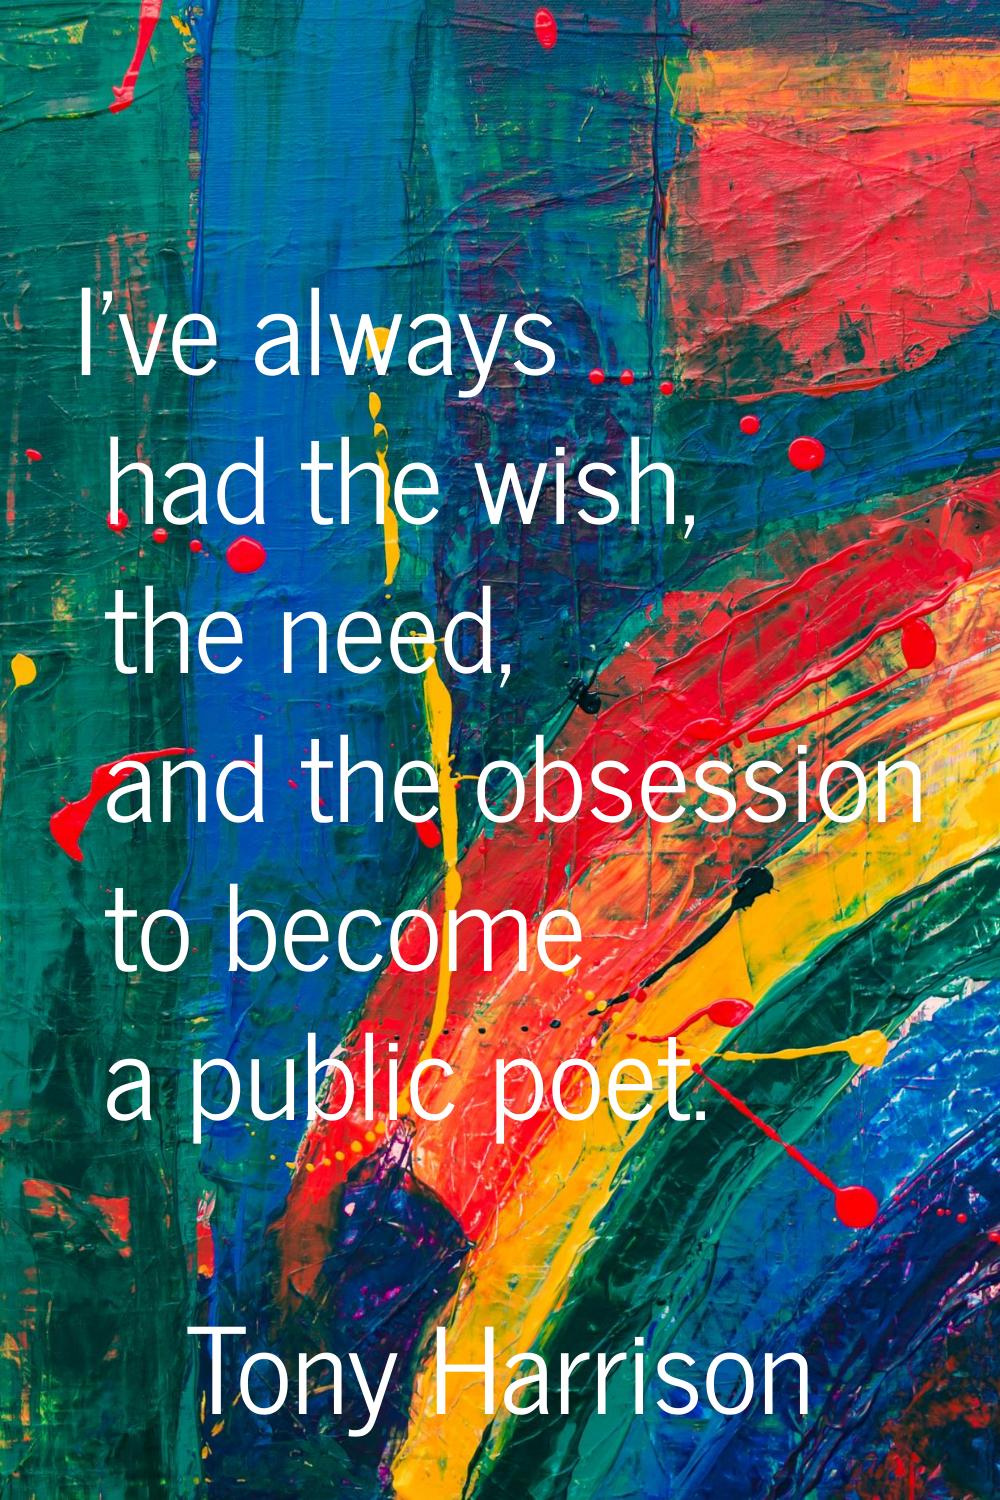 I've always had the wish, the need, and the obsession to become a public poet.